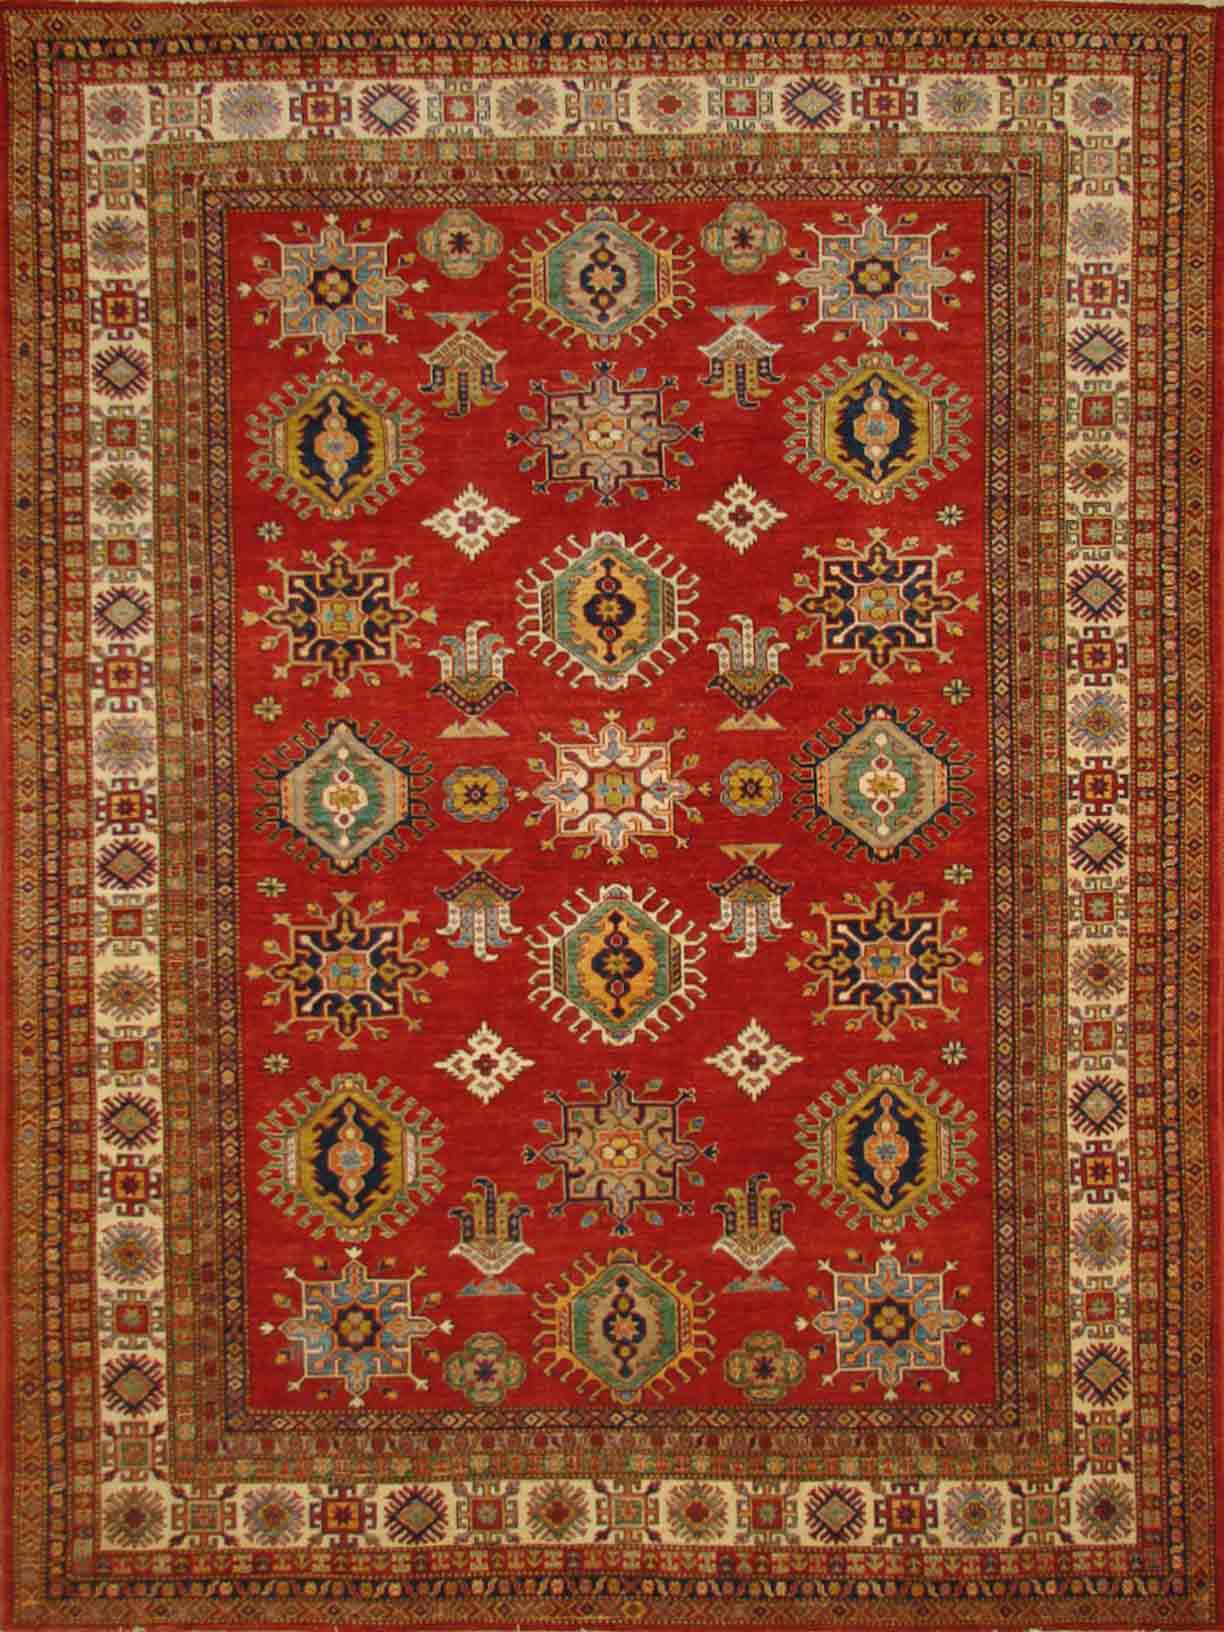 Persian & Antique Reproduction Rugs SUPER KAZAK 18428 Red - Burgundy & Ivory - Beige Hand Knotted Rug